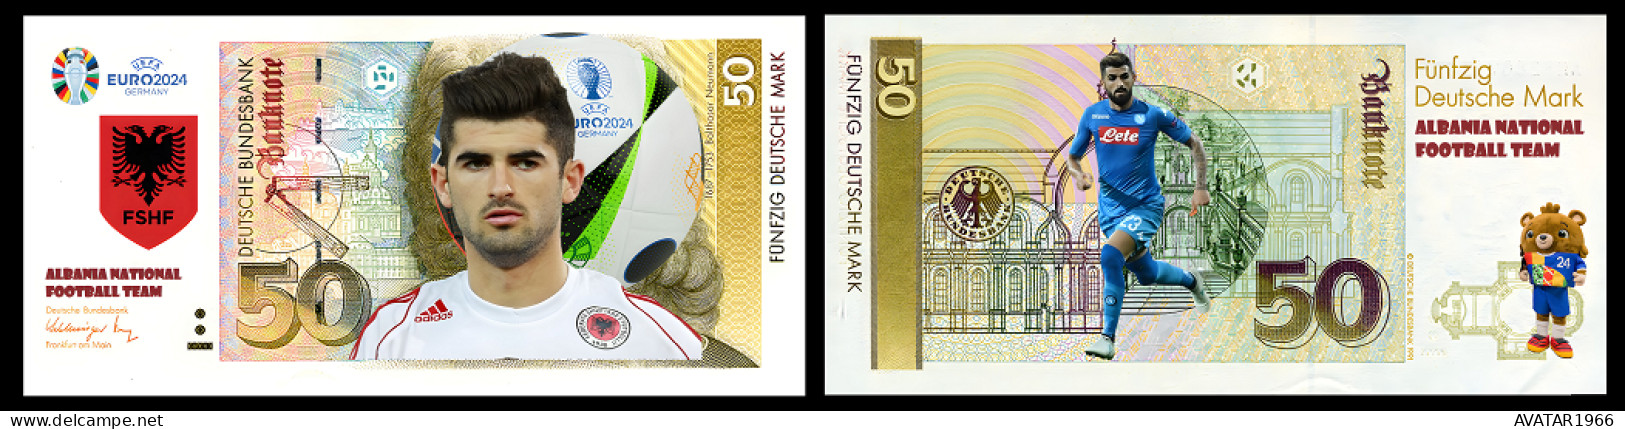 UEFA European Football Championship 2024 Qualified Country Albania 8 Pieces Germany Fantasy Paper Money - [15] Commemoratives & Special Issues